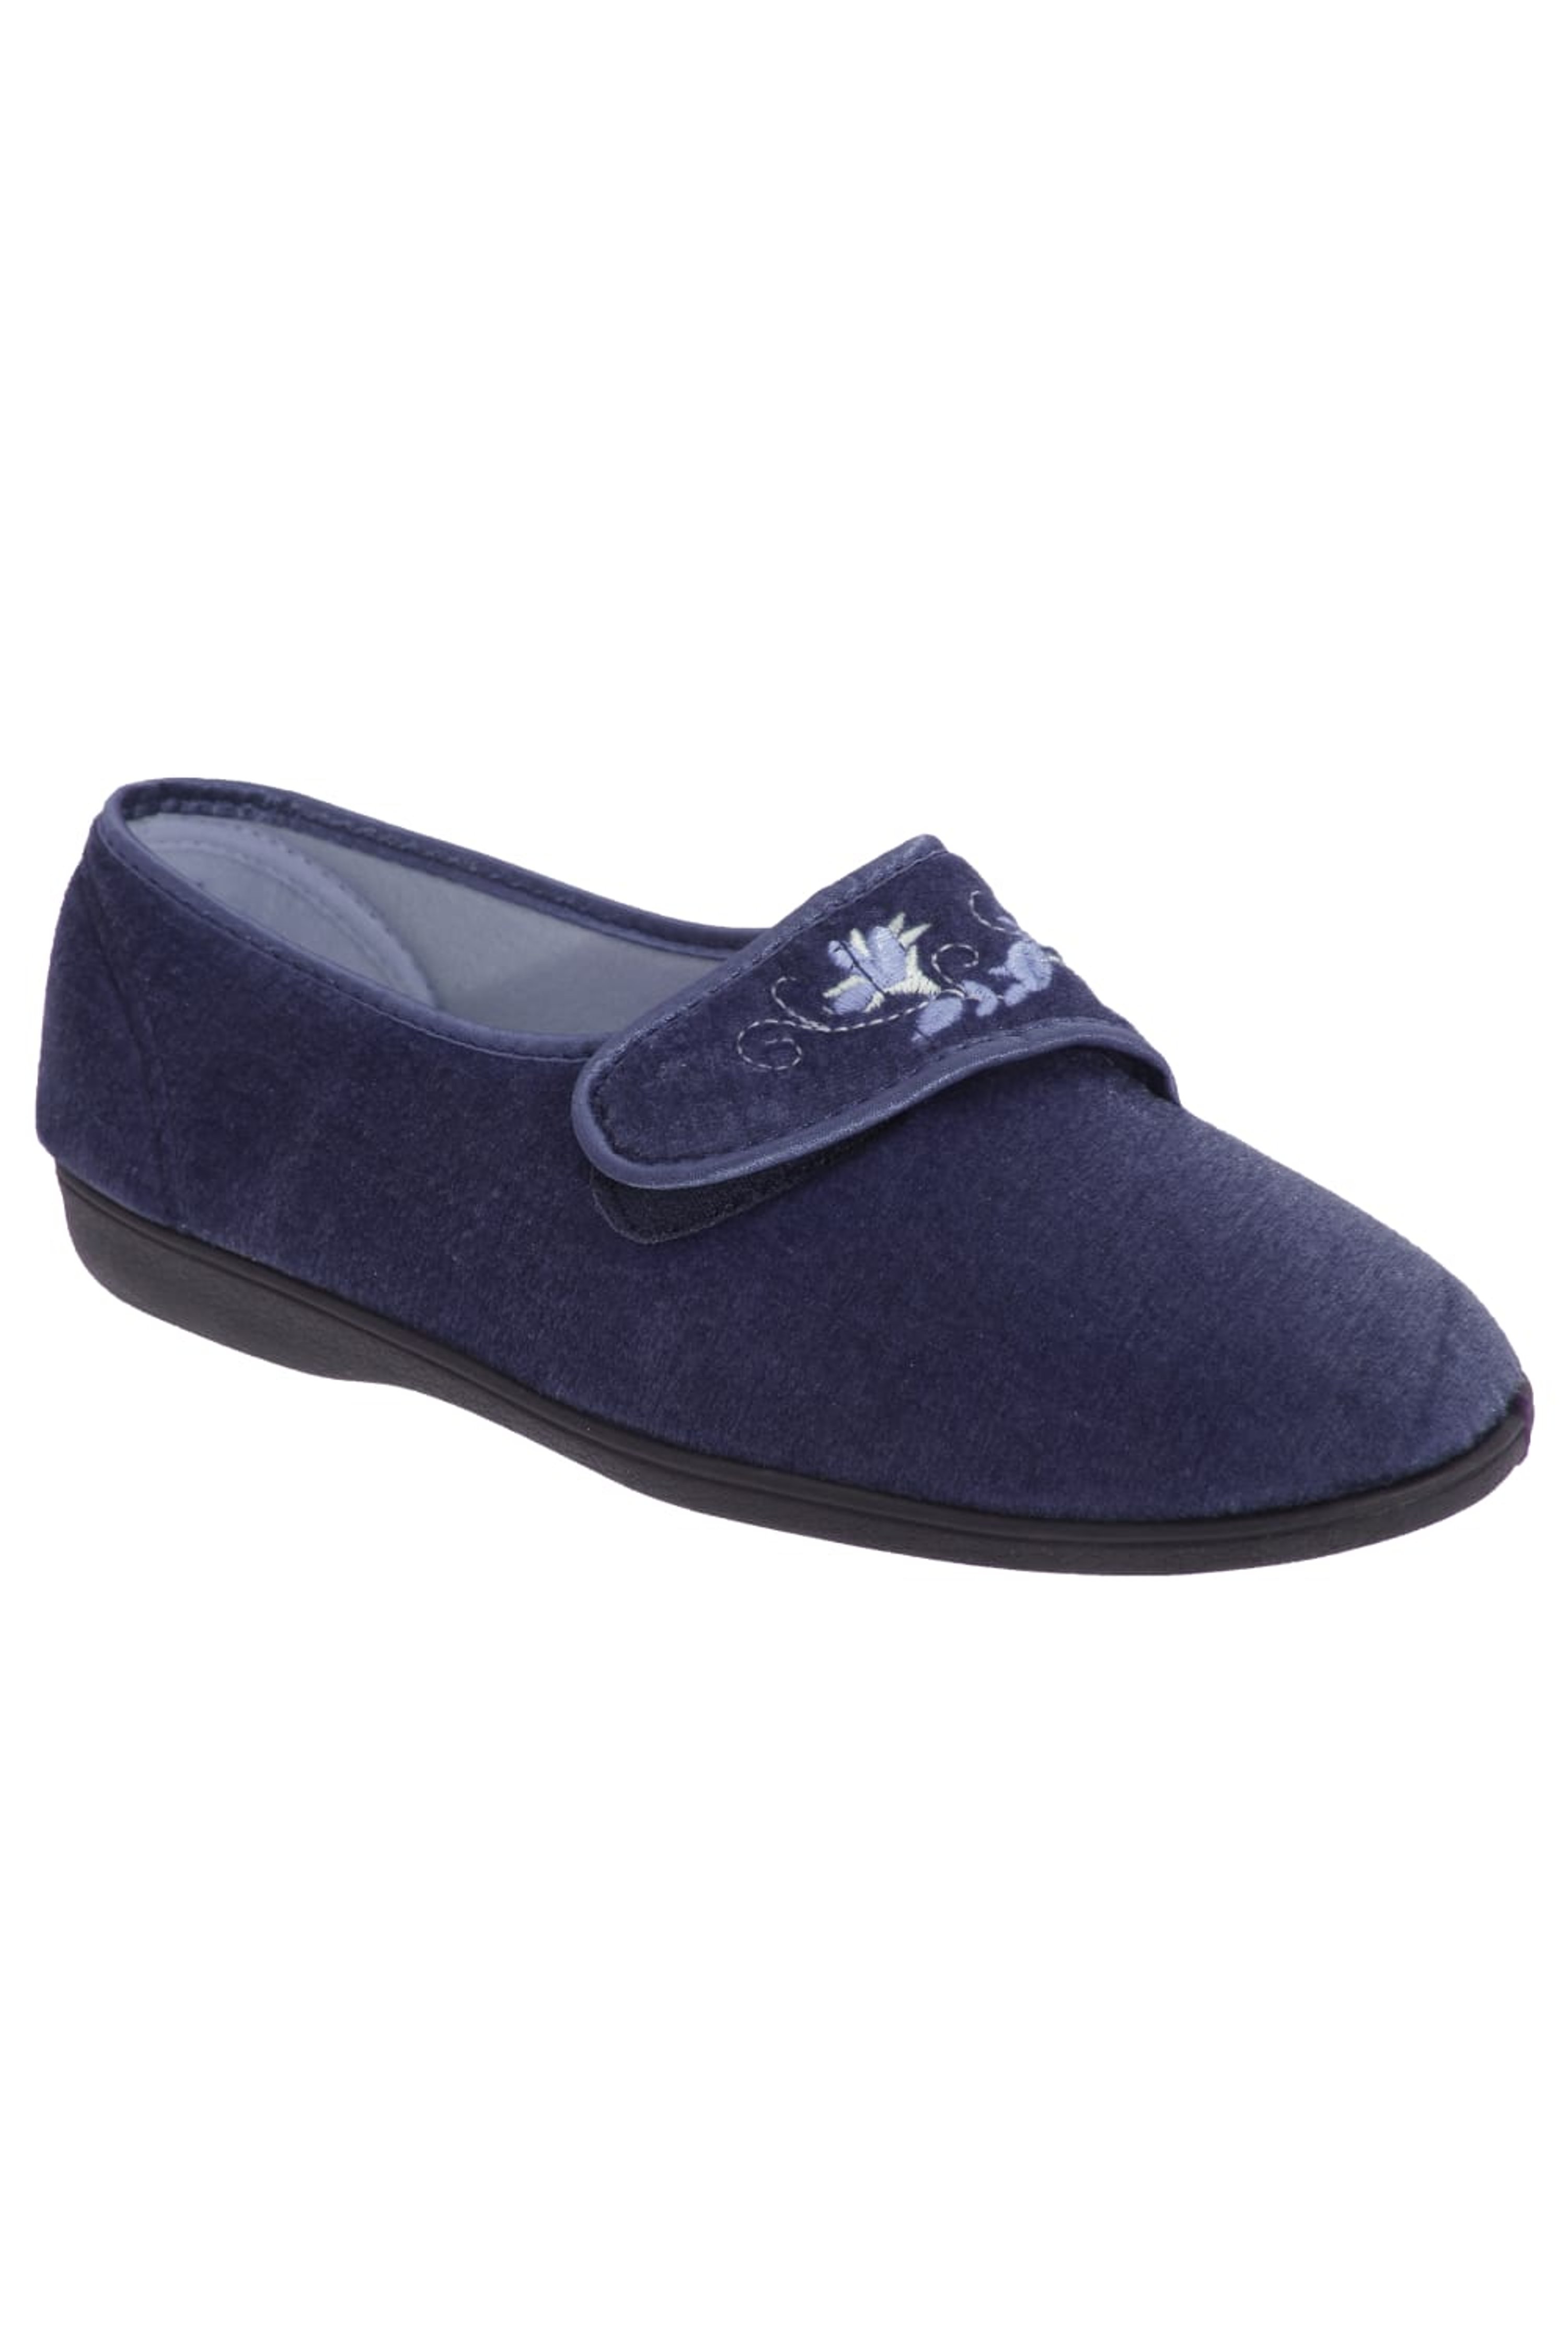 Sleepers JOLENE Ladies Soft Velour Embroidered Floral Touch Fasten Slippers Navy 